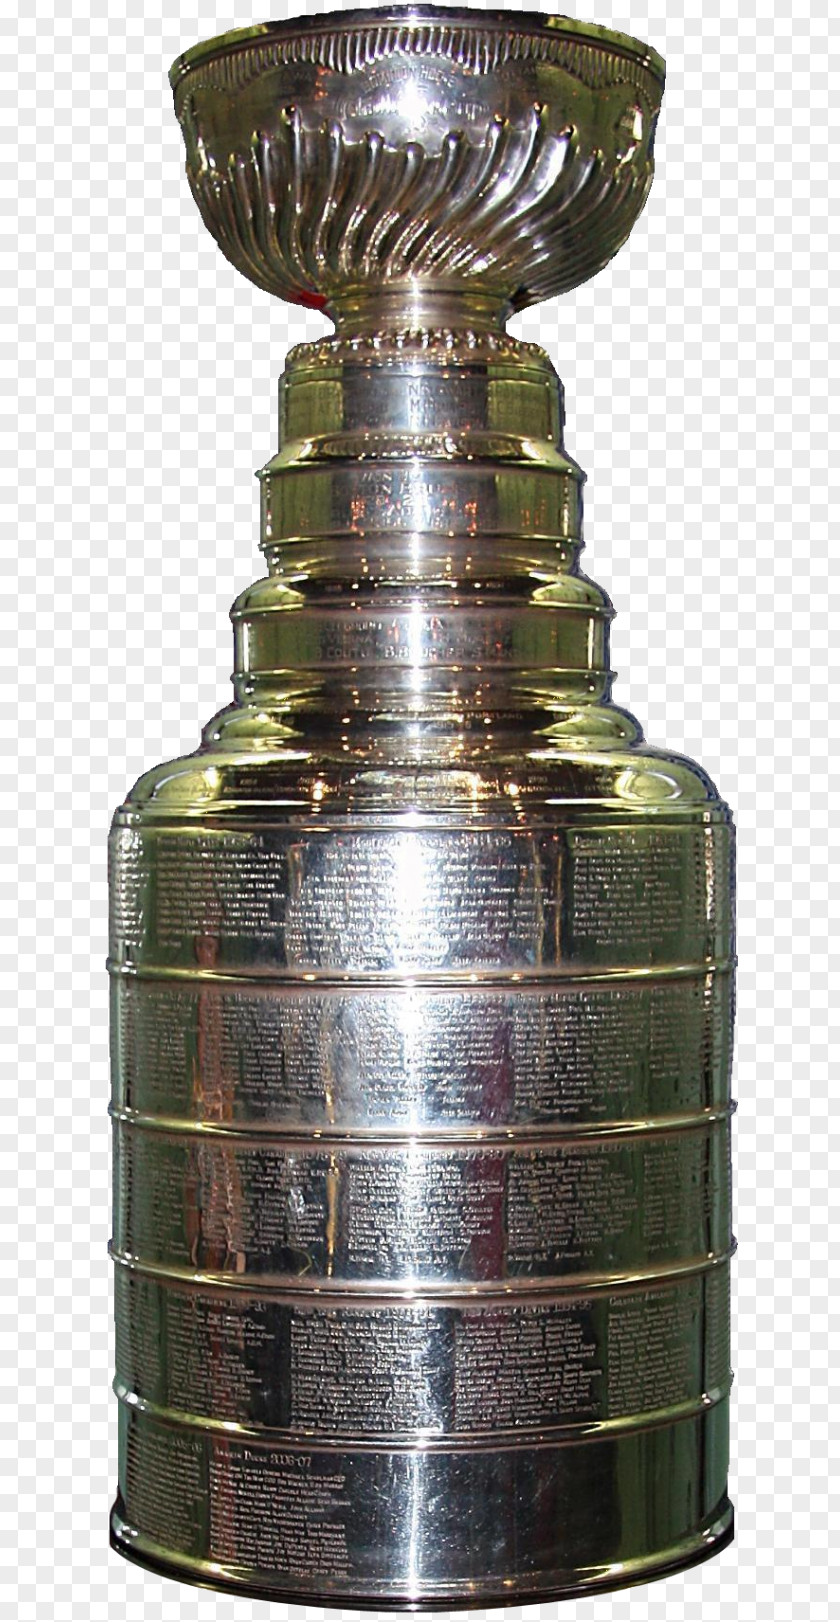 Trophy National Hockey League Stanley Cup Playoffs 2013 Finals Chicago Blackhawks PNG